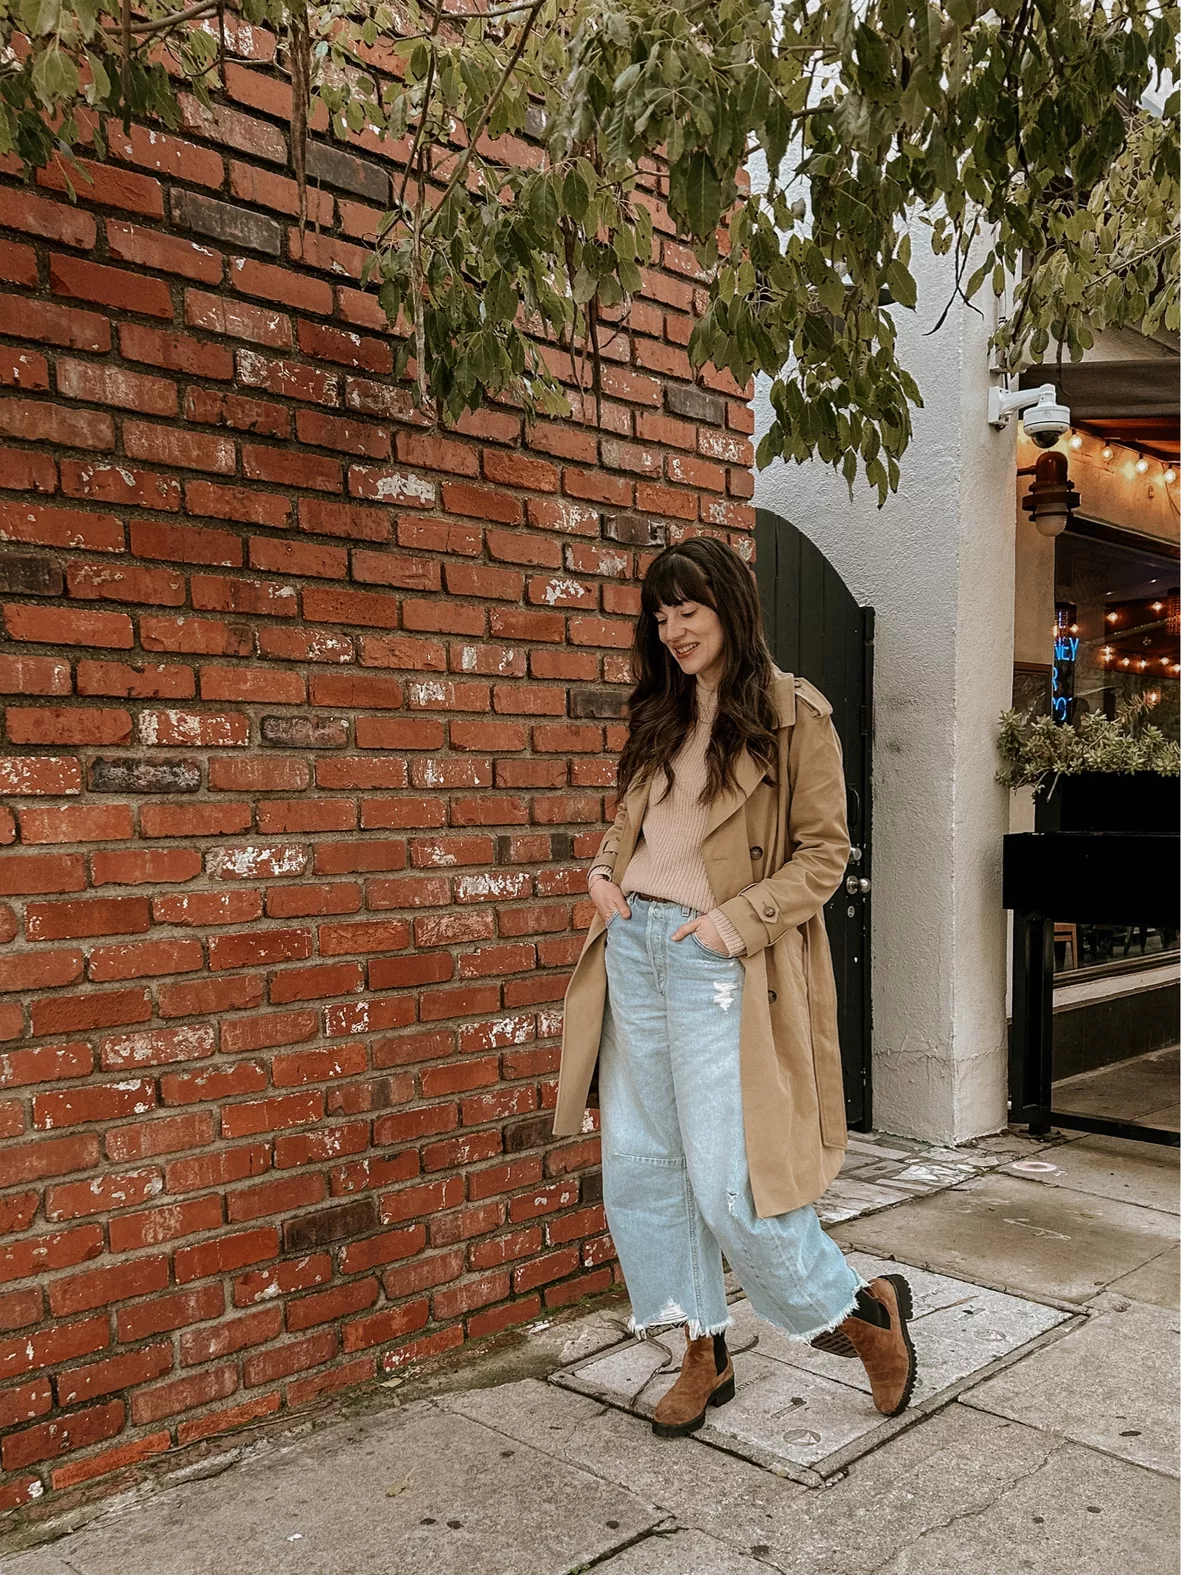 My Go-To California Winter Outfit - Jeans and a Teacup